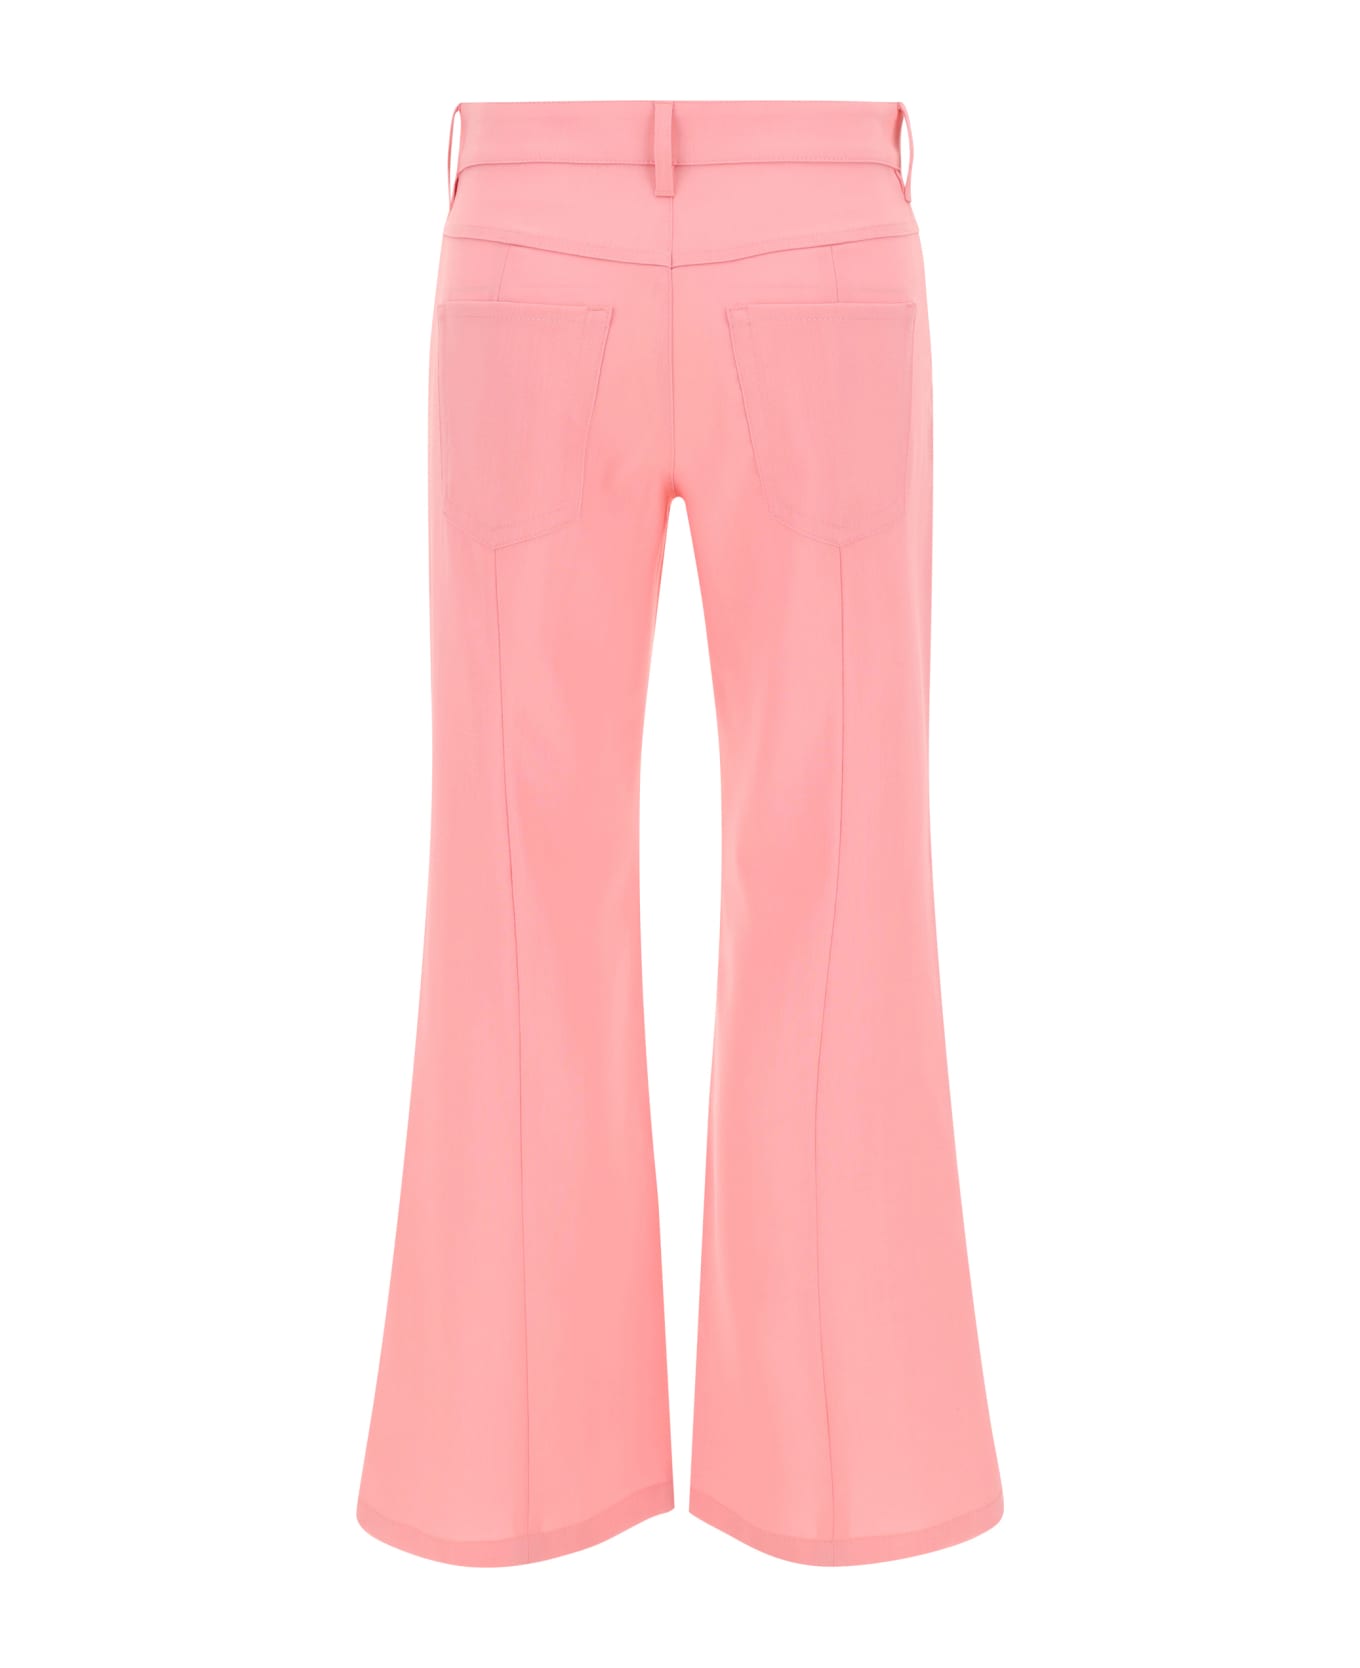 Marni Trousers - Pink Gummy ボトムス